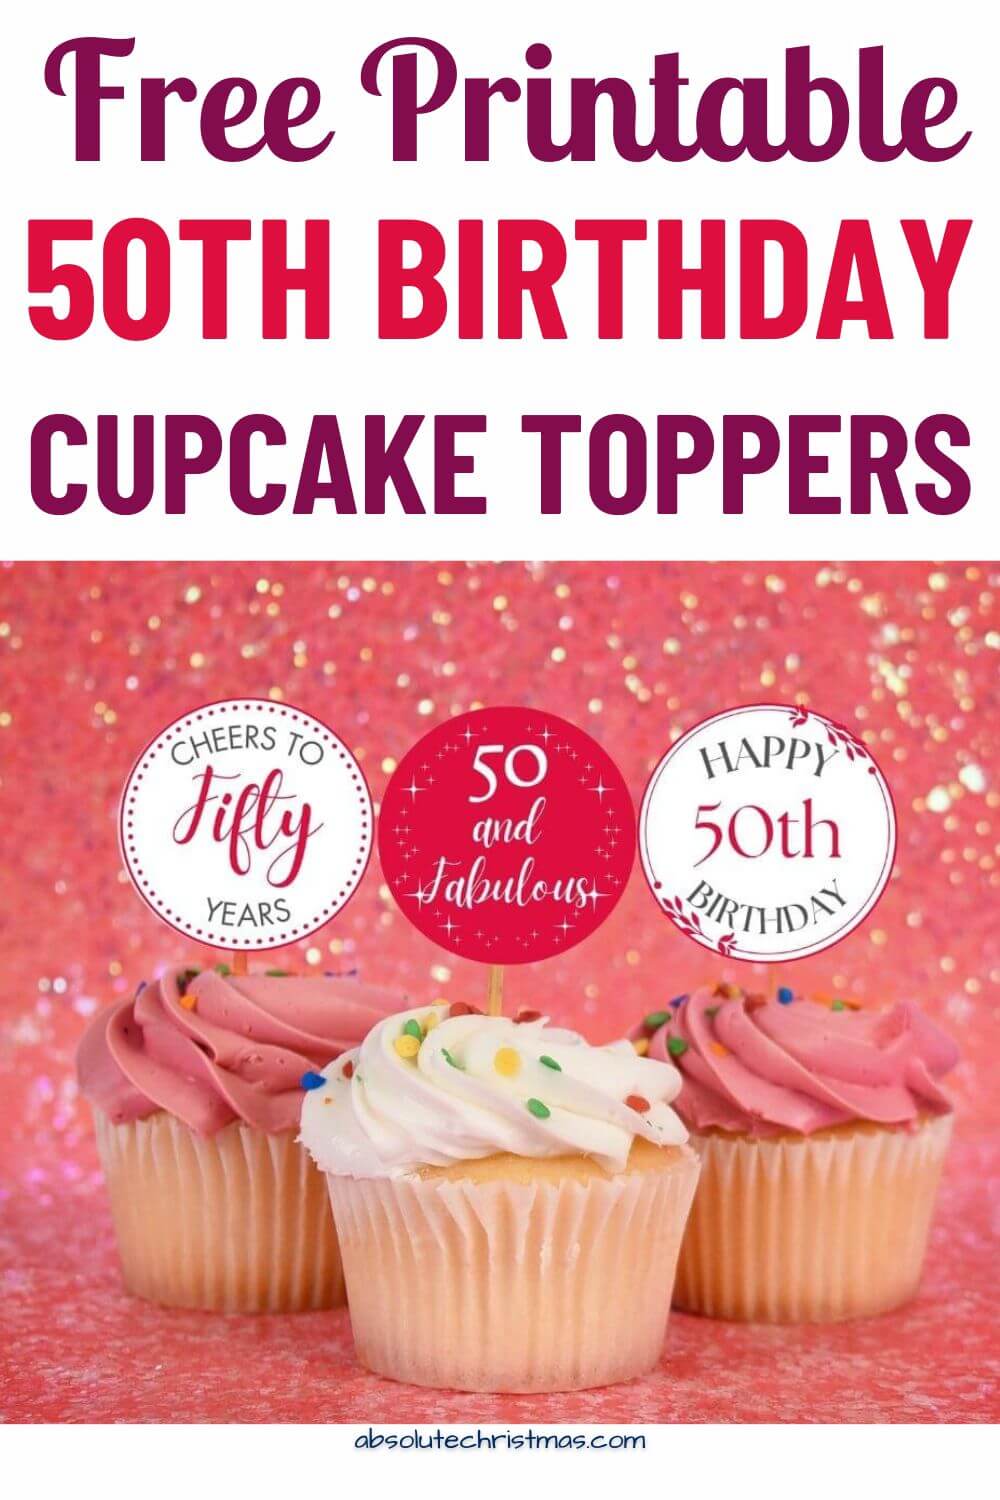 Free Printable 50th Birthday Cupcake Toppers Pin